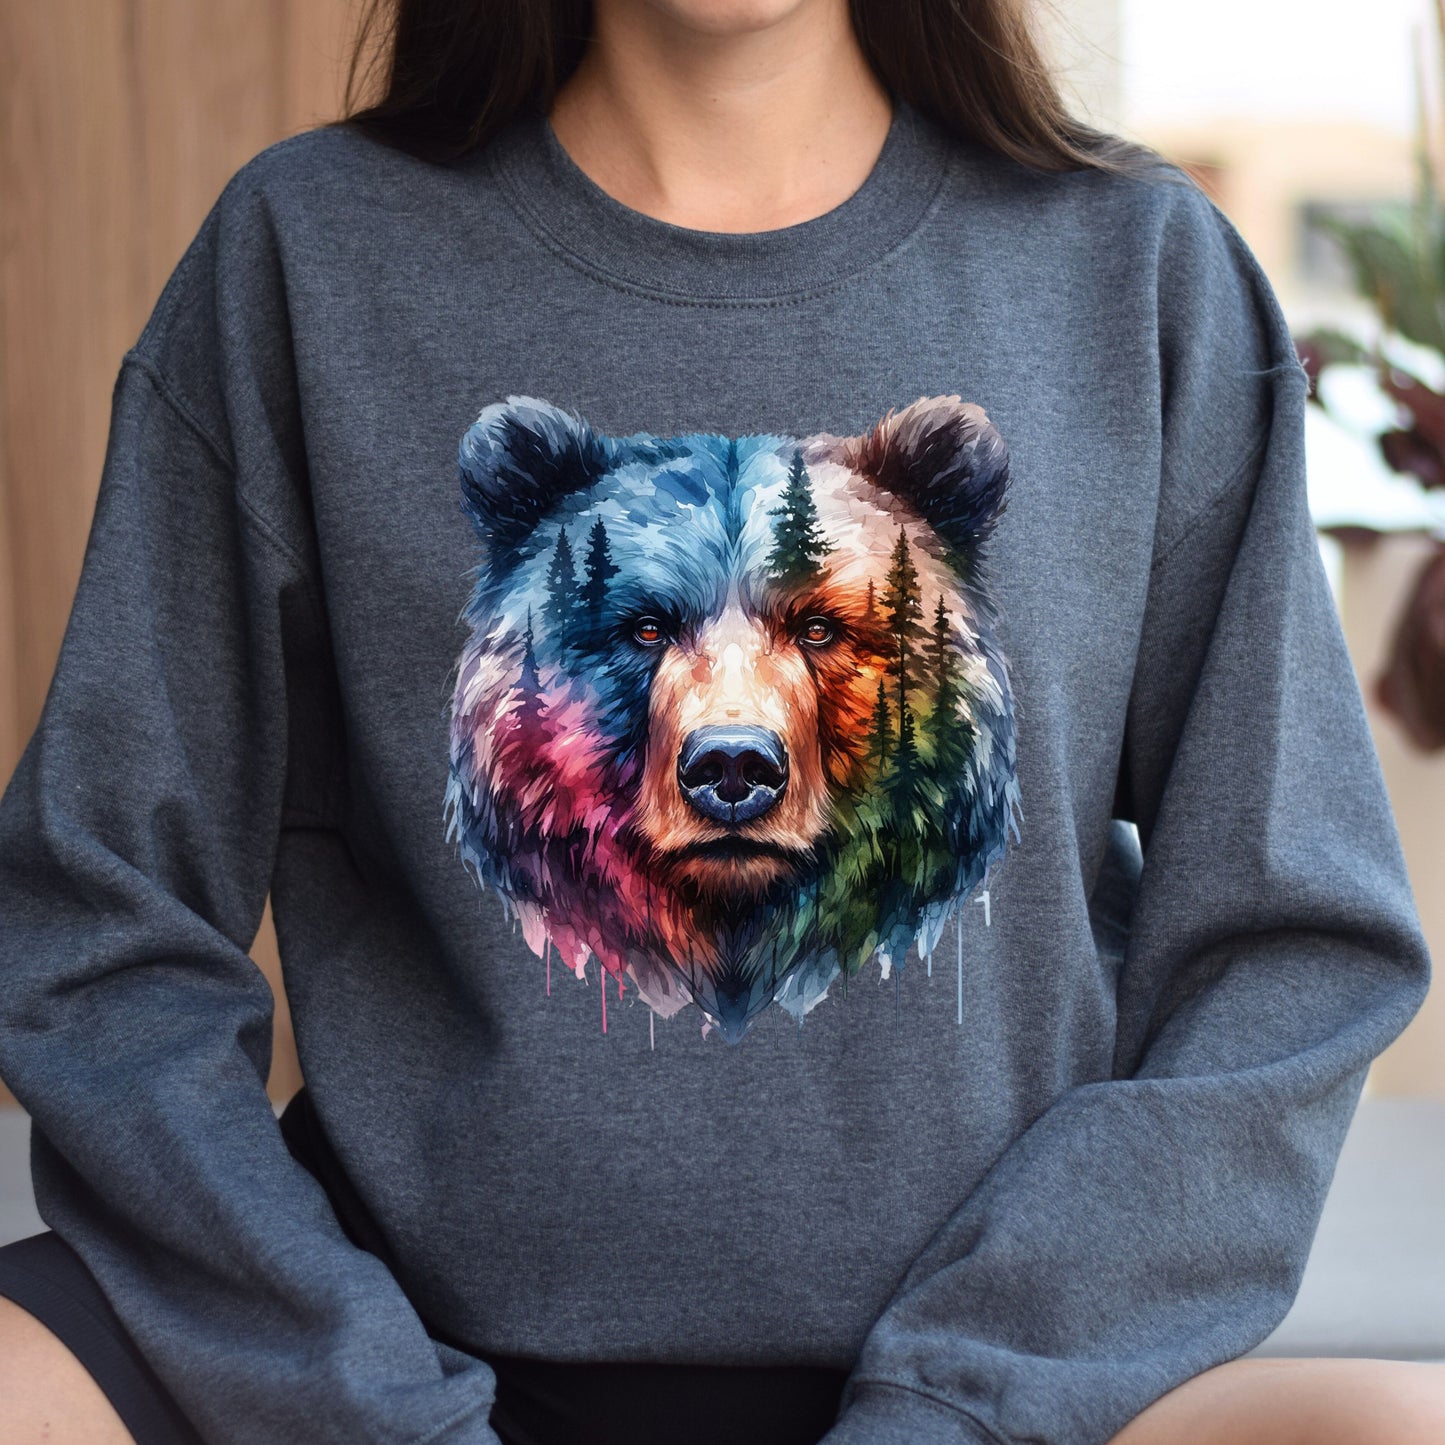 Grizzly and Forest Watercolor Unisex Sweatshirt Black Navy Dark Heather-Dark Heather-Family-Gift-Planet